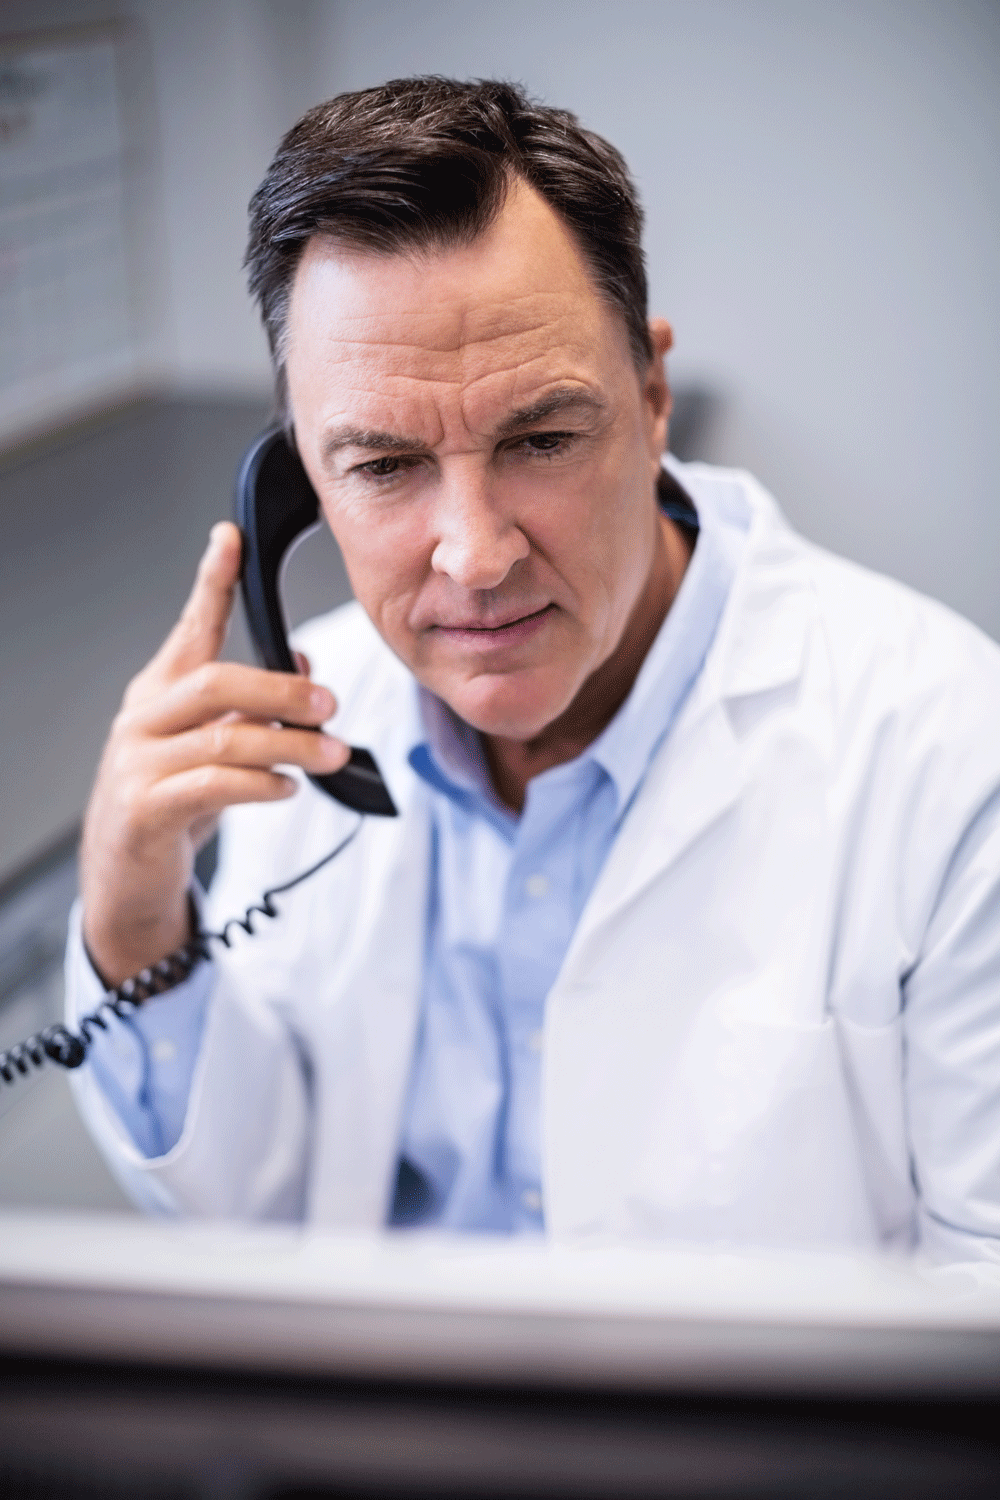 male doctor on the phone